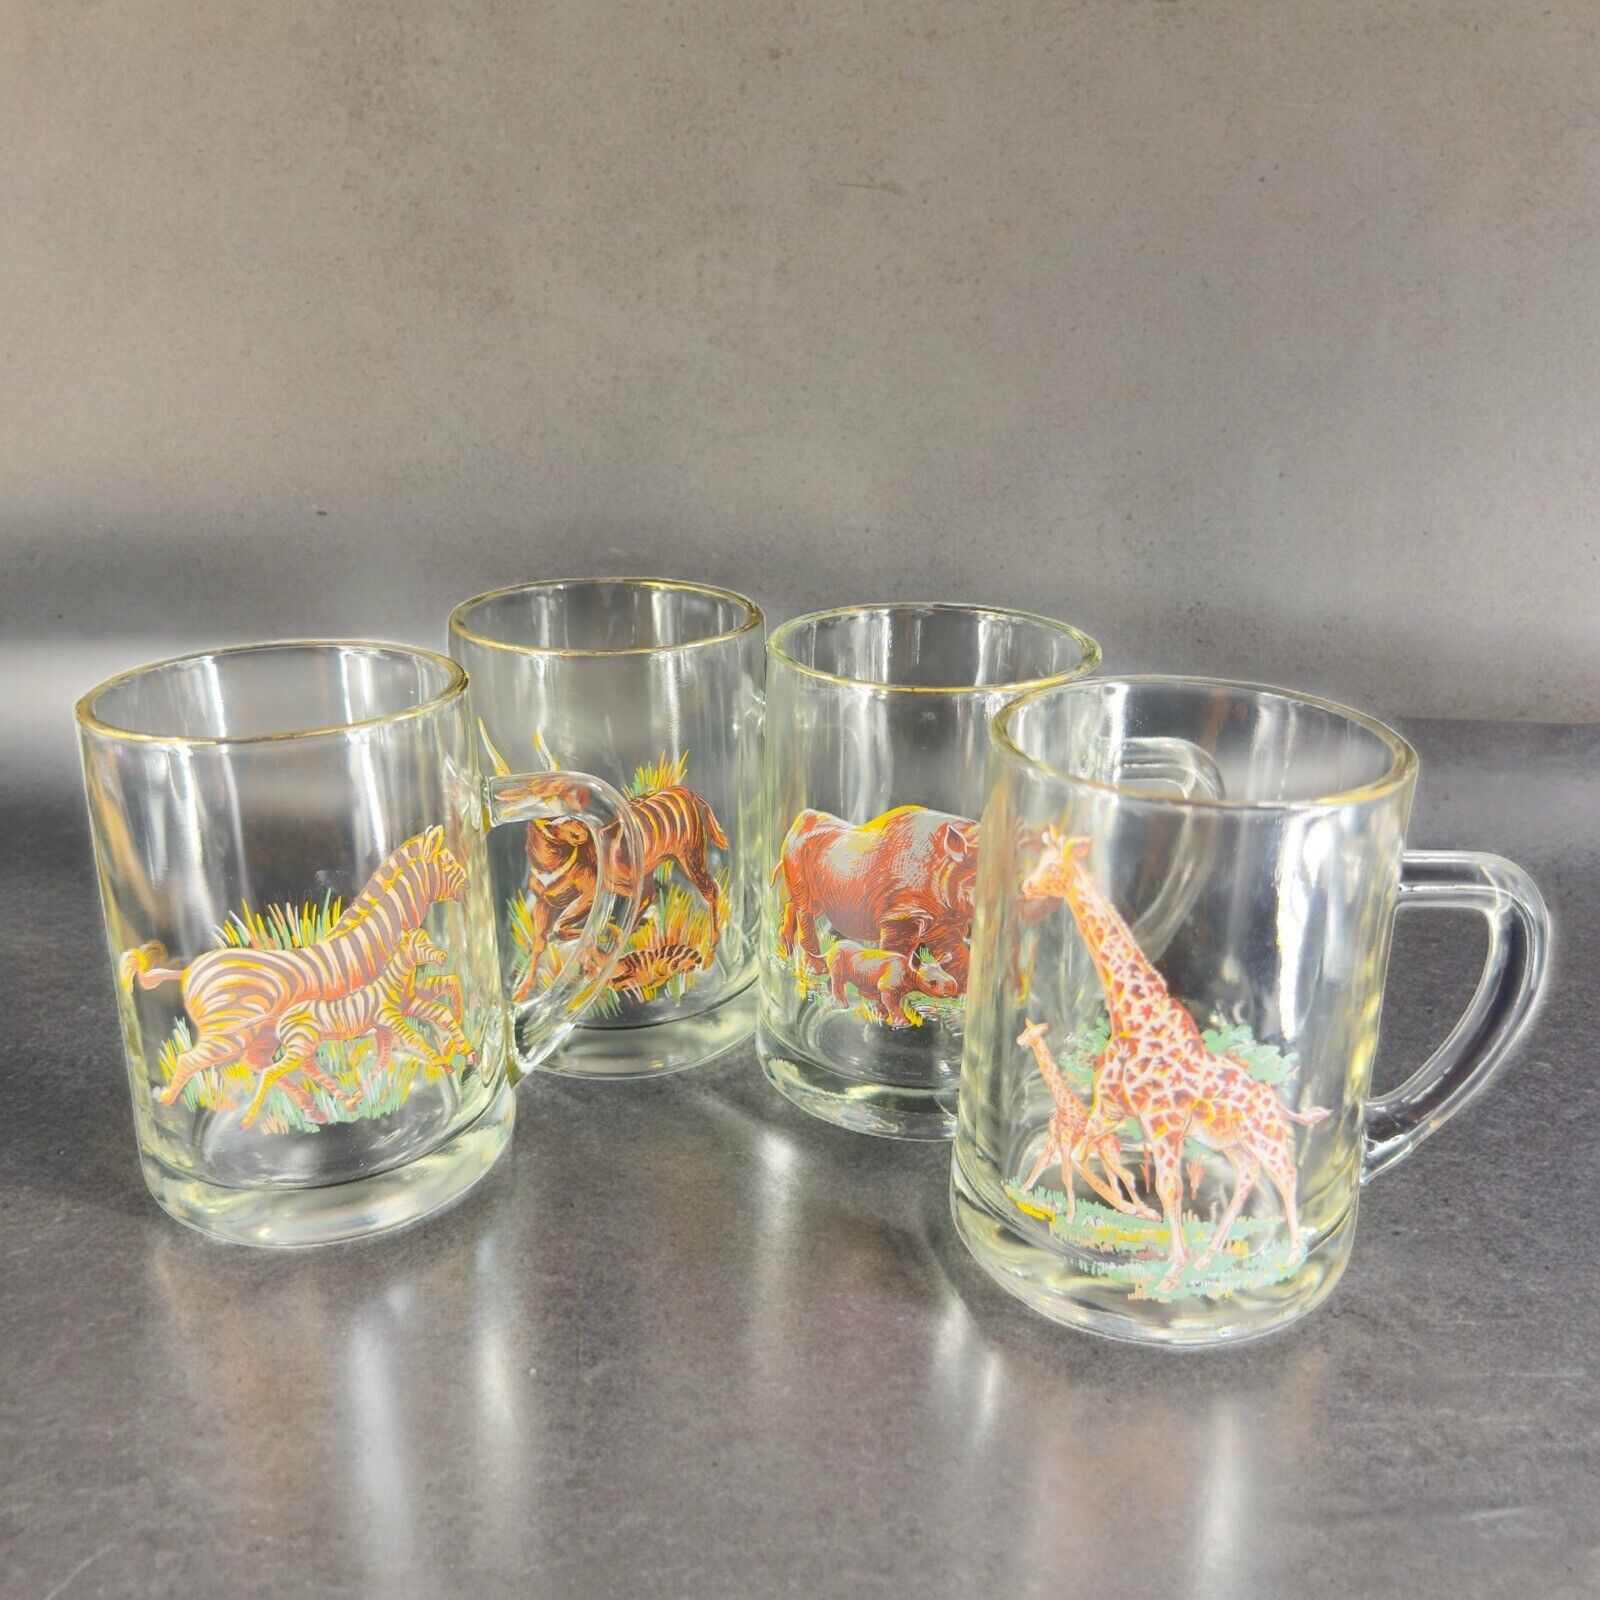 Vintage Large Coffee Mug Cup With Wild Live Animals Clear With Handles Set 4 VTG